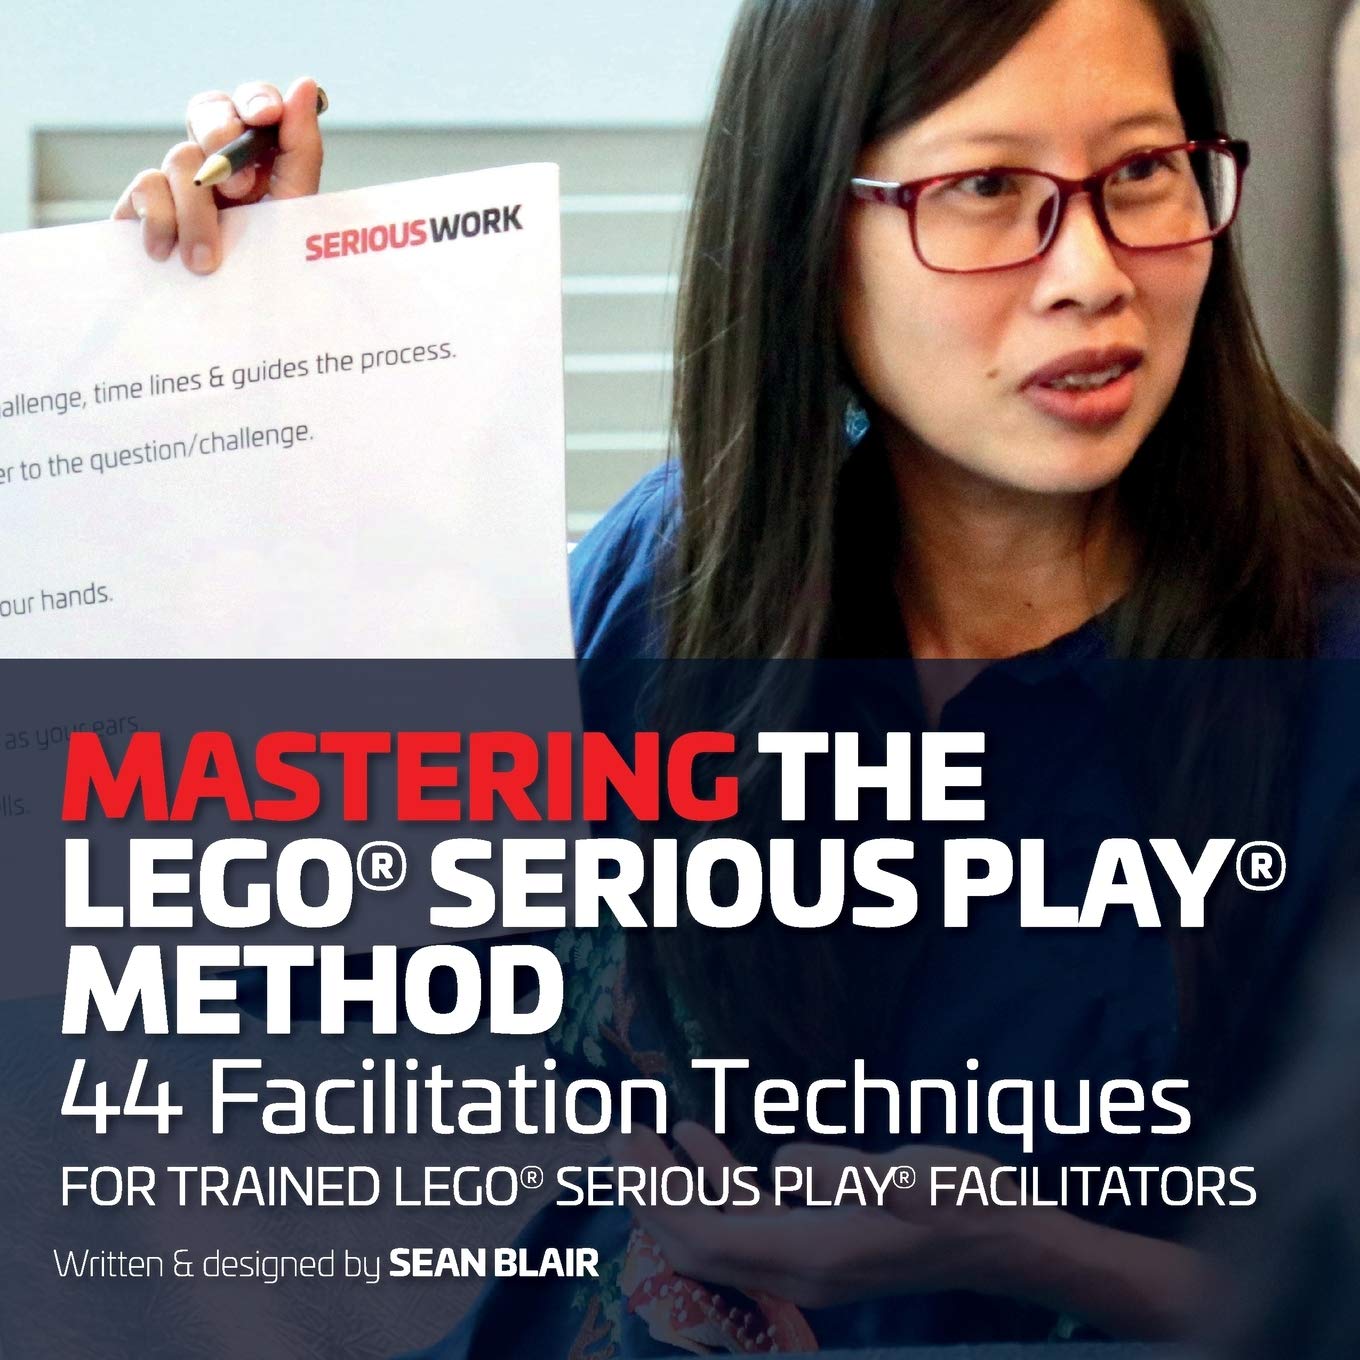 Mastering the Lego Serious Play Method - 44 Facilitation Techniques for Trained LEGO Serious Play Facilitators